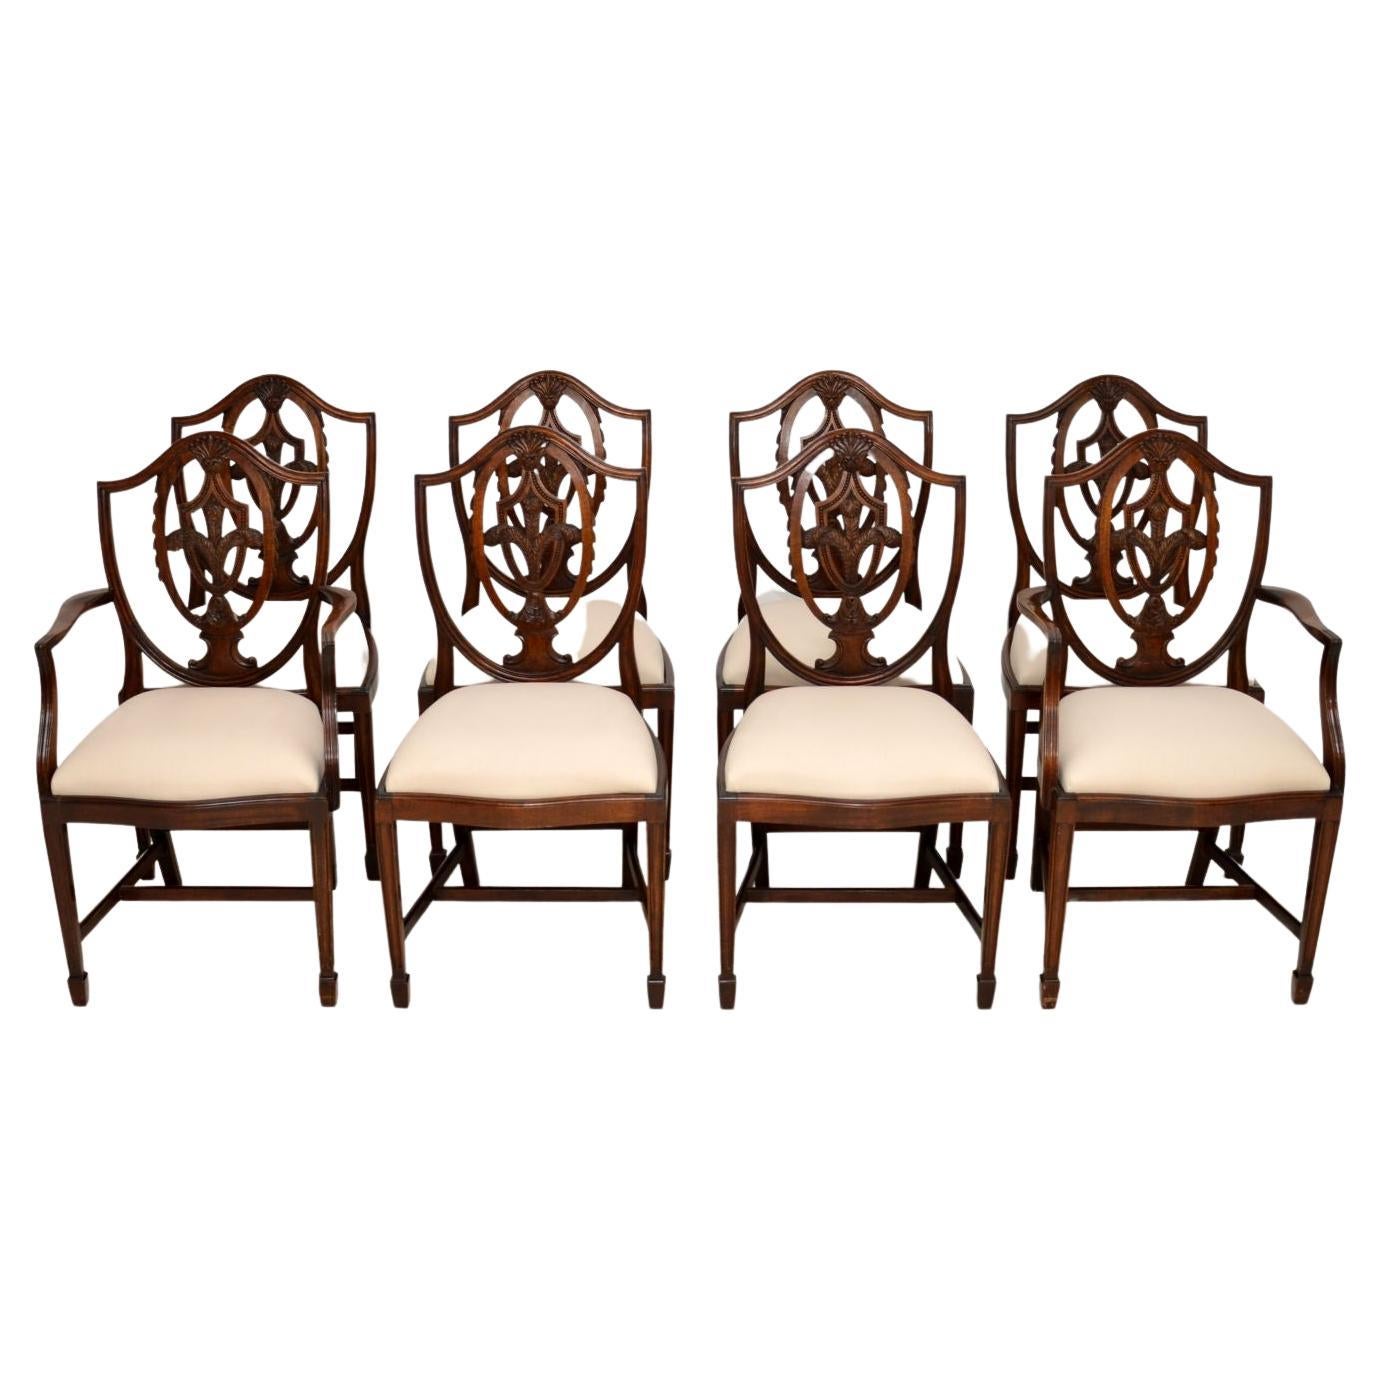 Set of 8 Antique Shield Back Dining Chairs